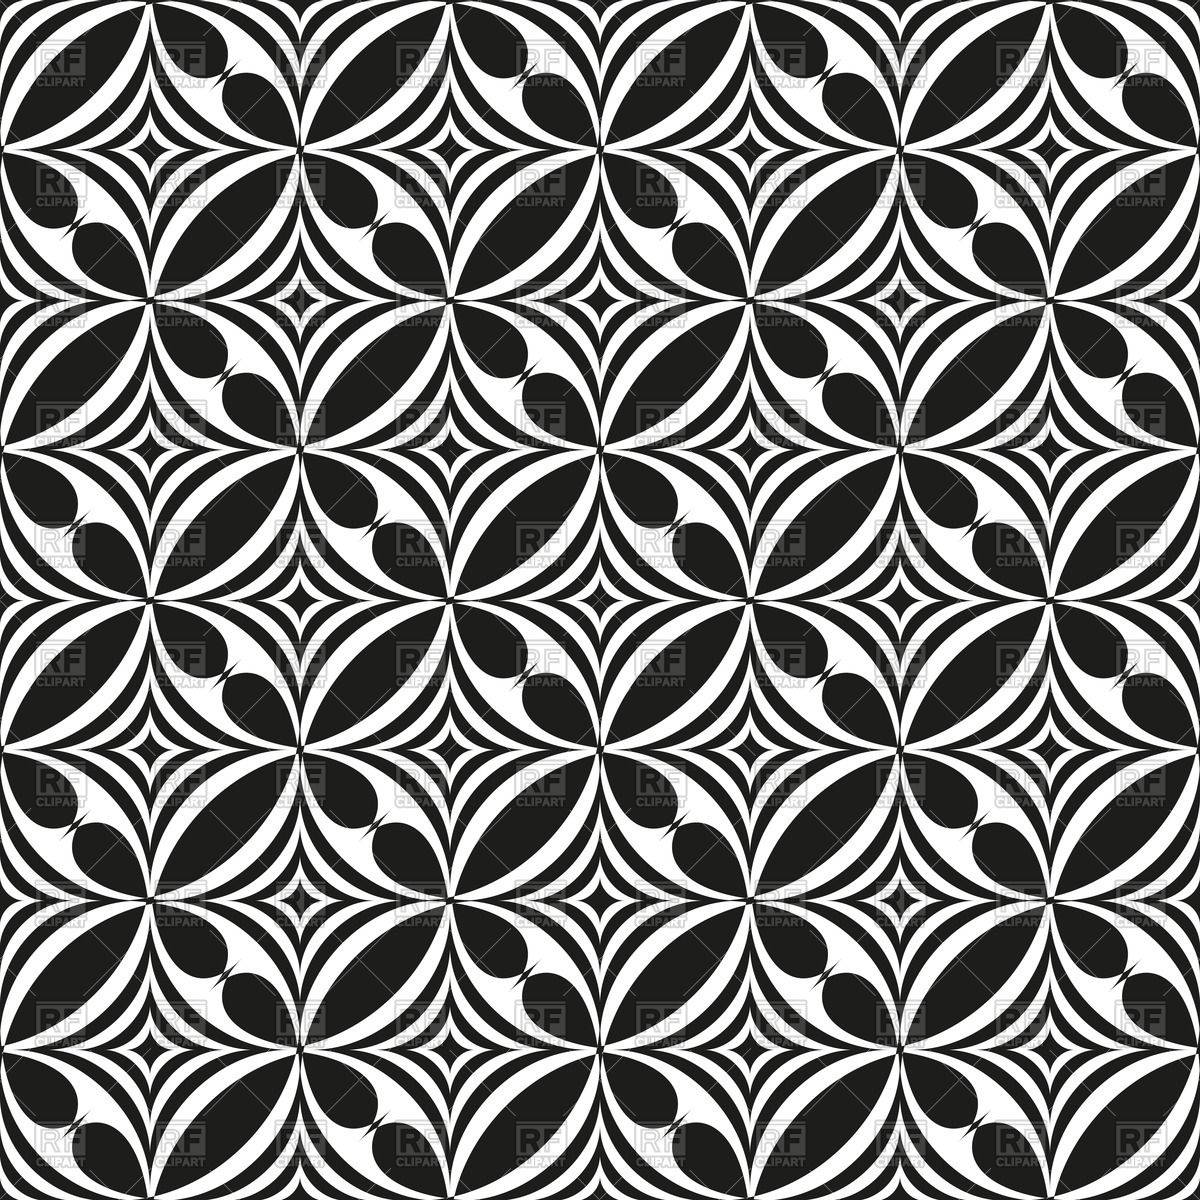 Black white abstract clipart 